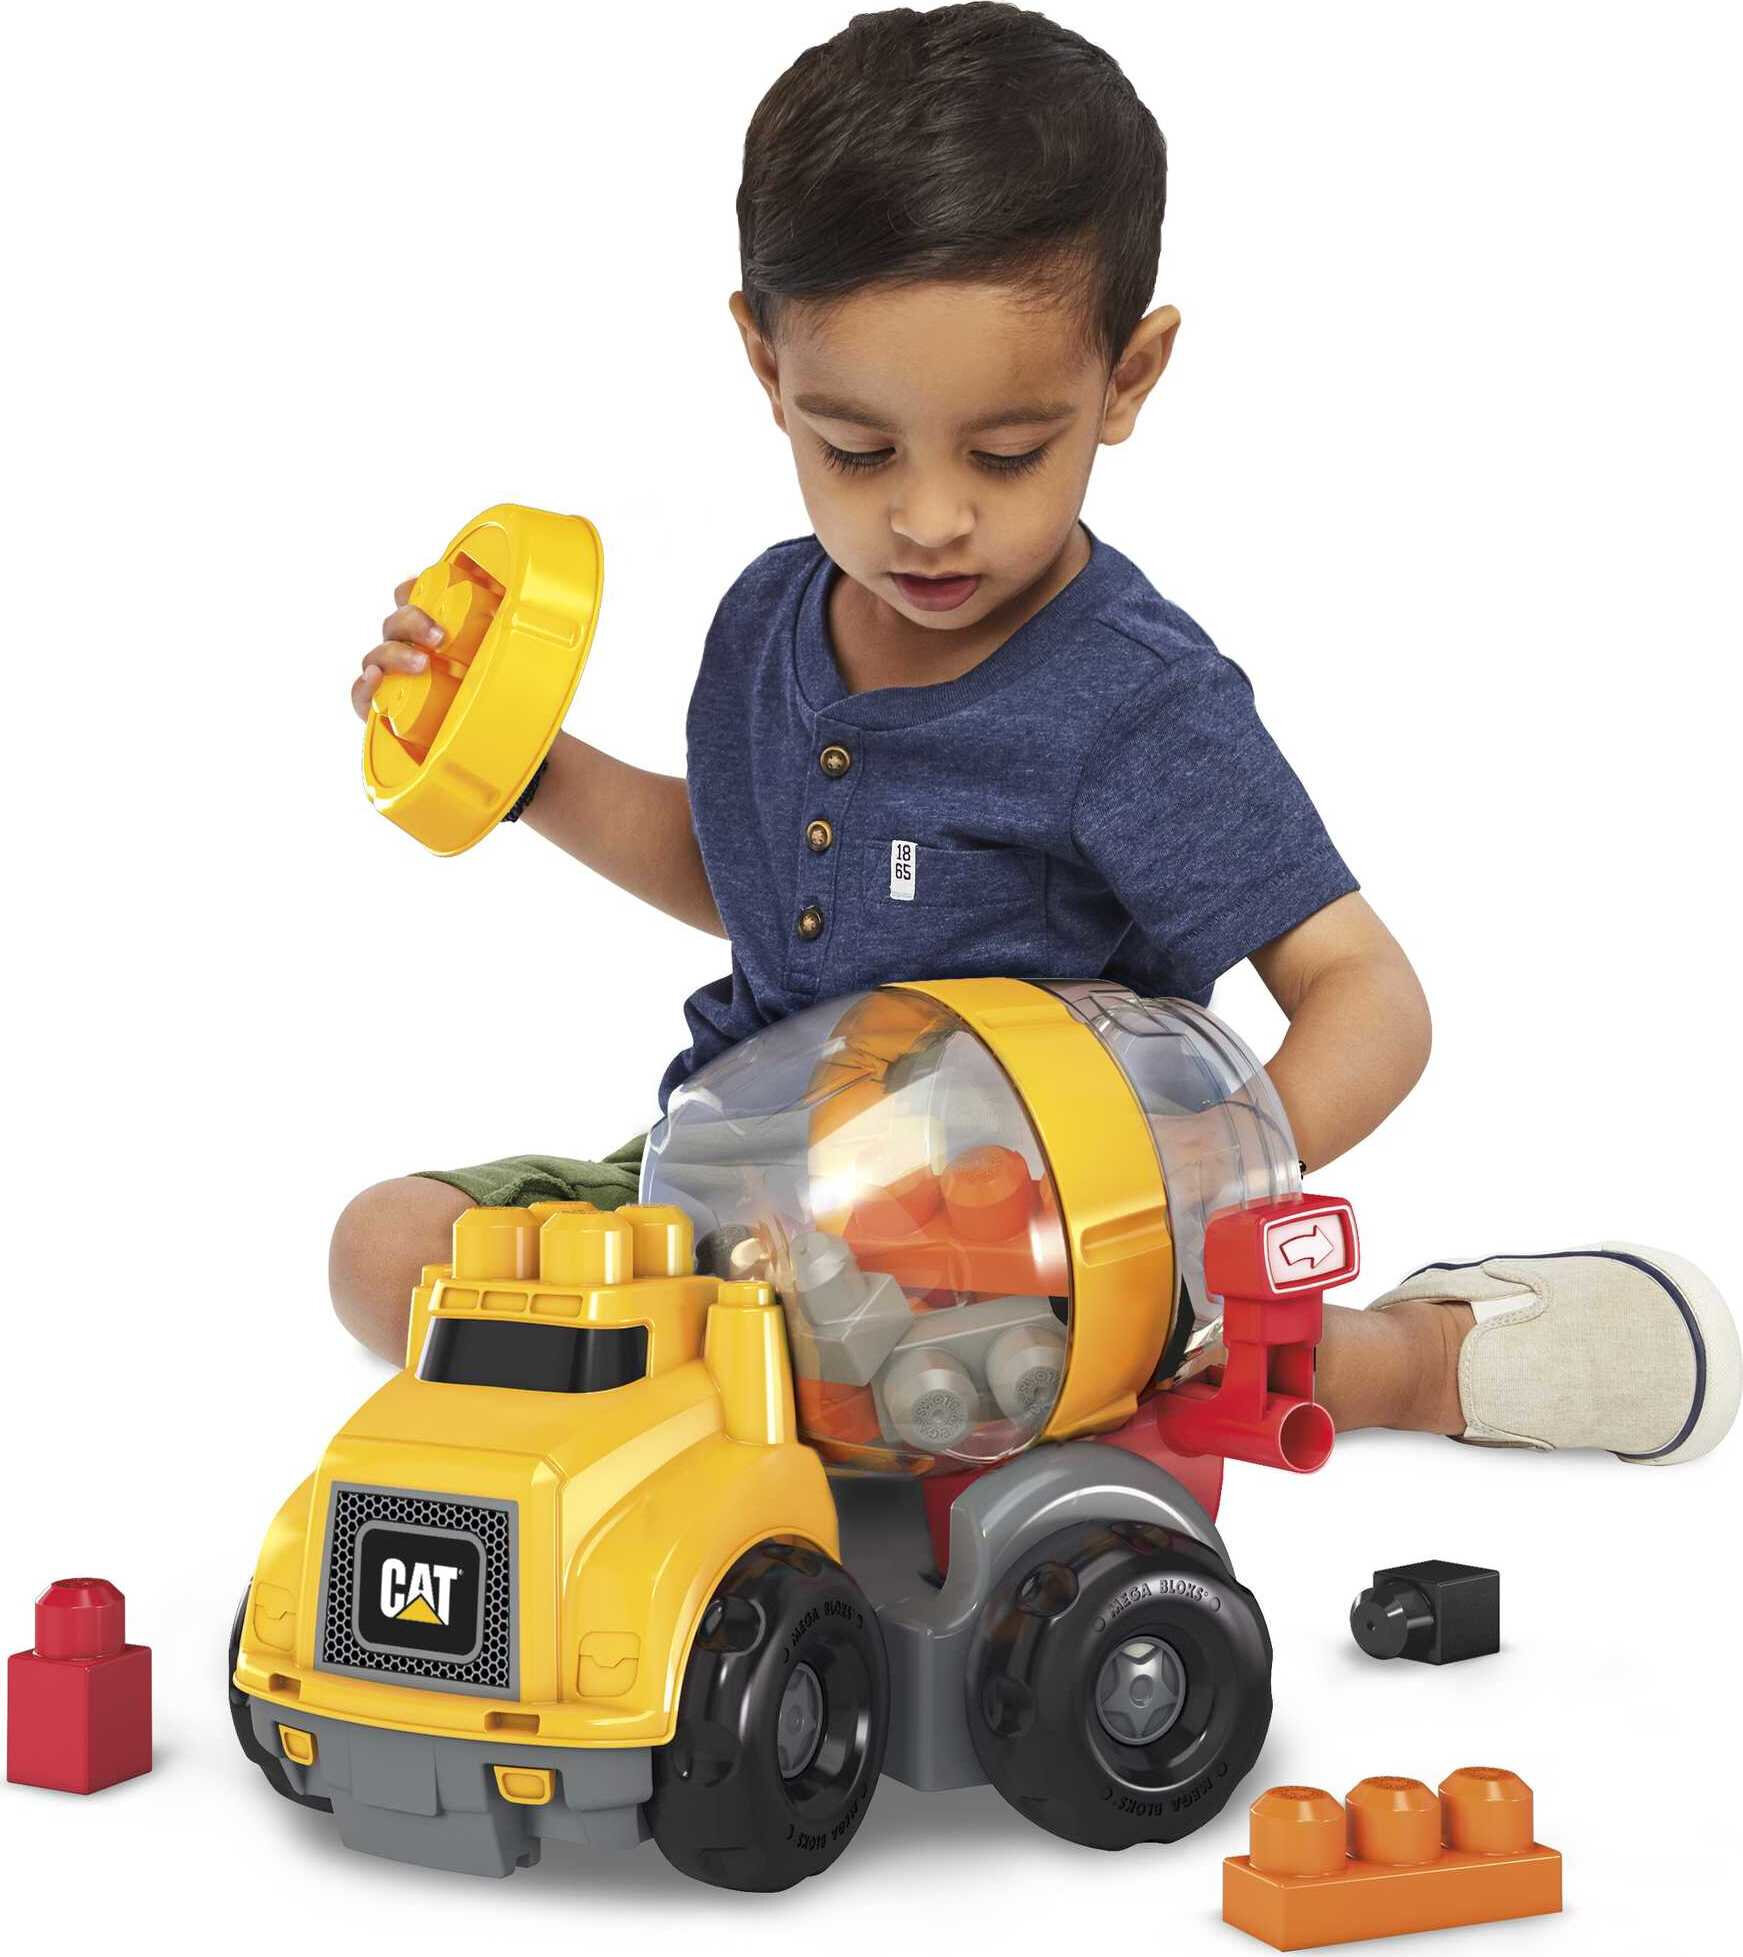 MEGA BLOKS Fisher-Price Building Toy Blocks Cat Cement Mixer Truck (9 Pieces) For Toddler - image 3 of 7